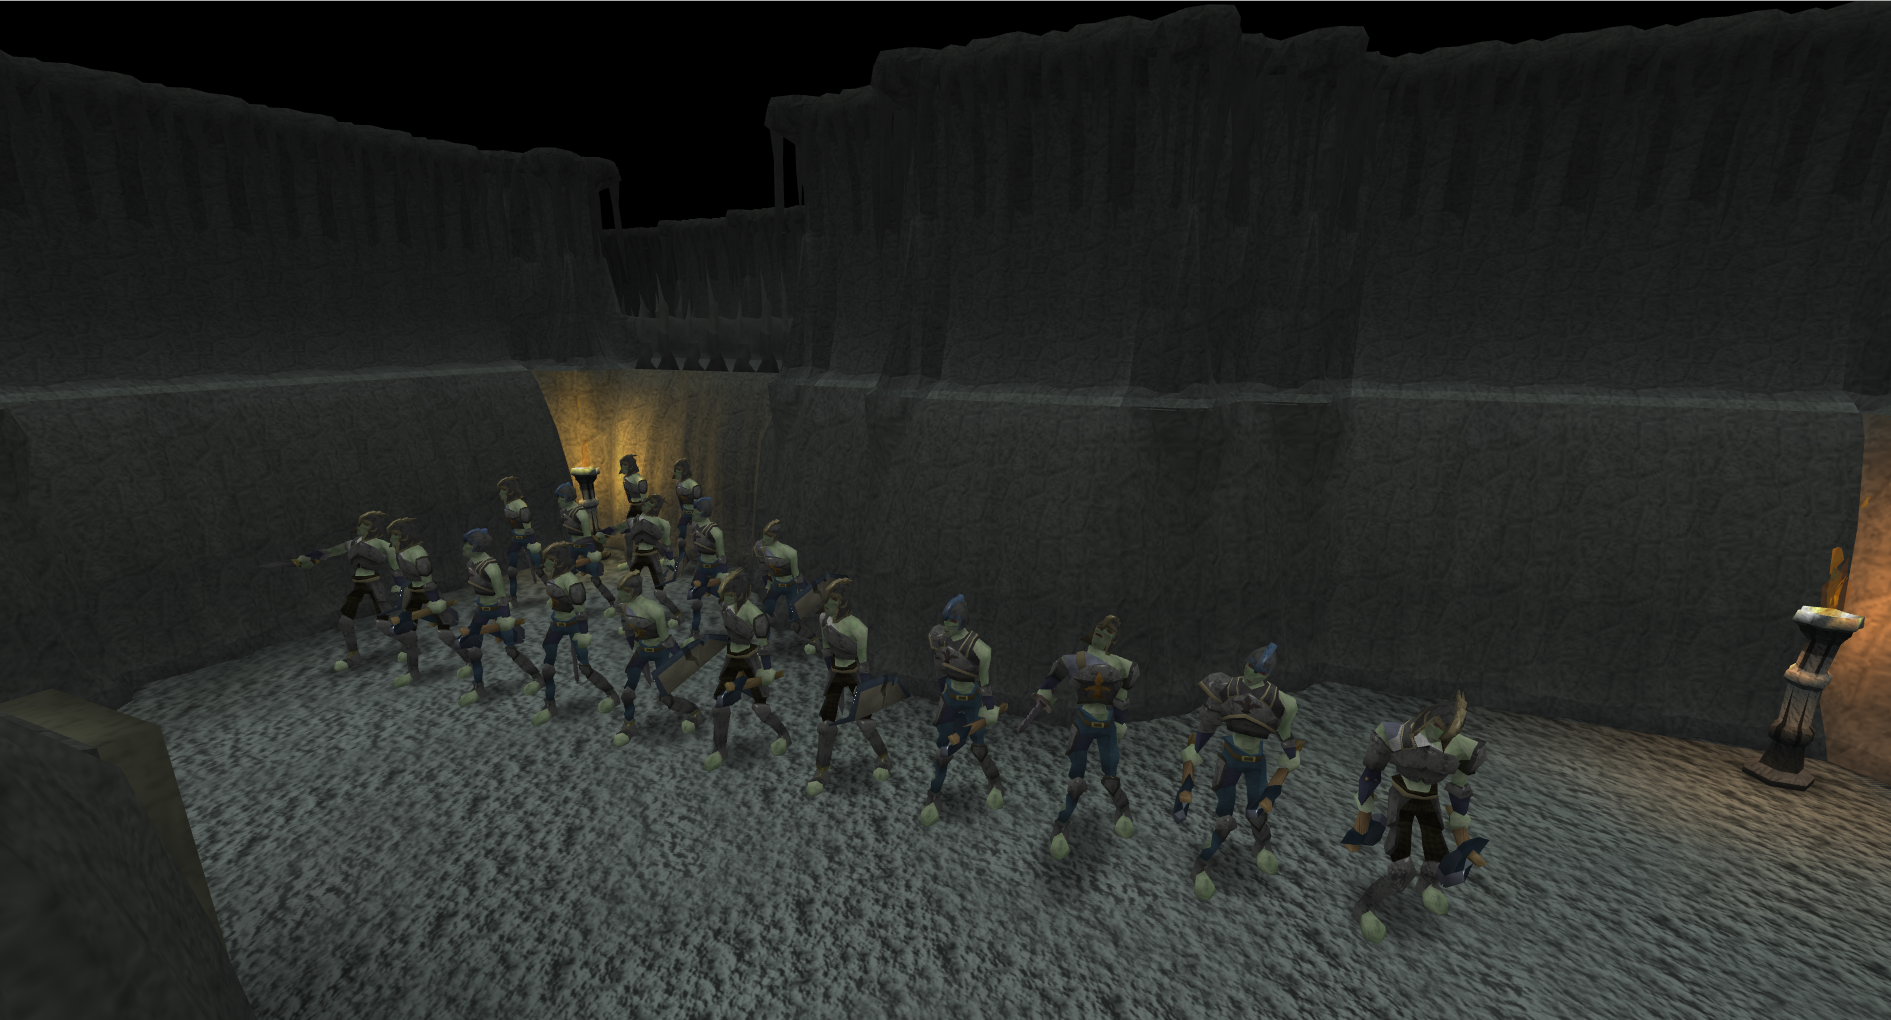 Temple of Aminishi  Elite Dungeon - The RuneScape Wiki